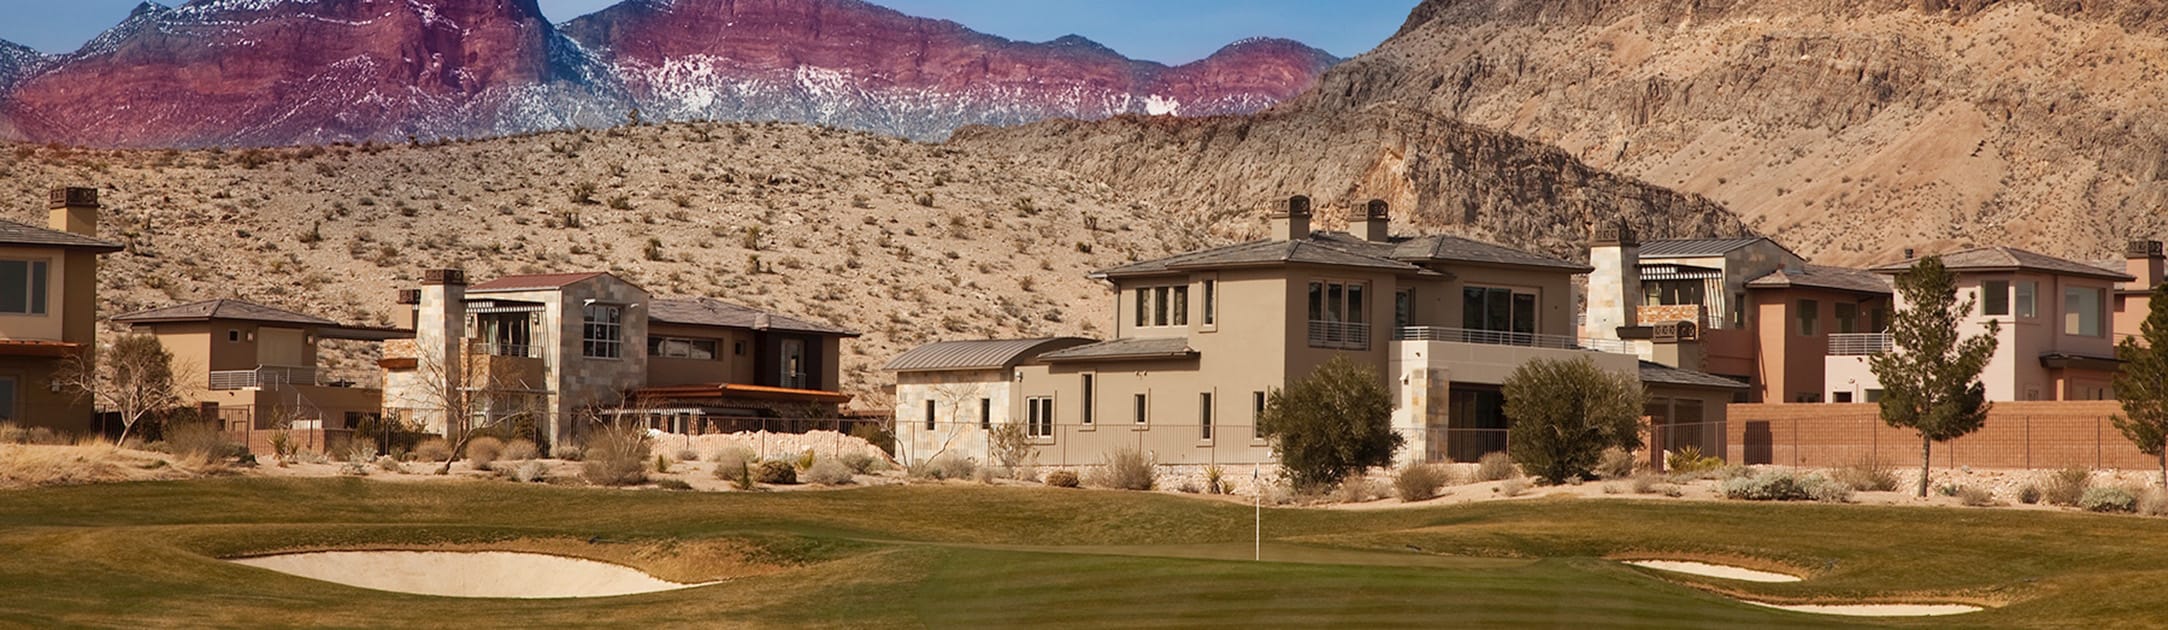 Golf course luxury homes with hills and red rock mountains in the background.